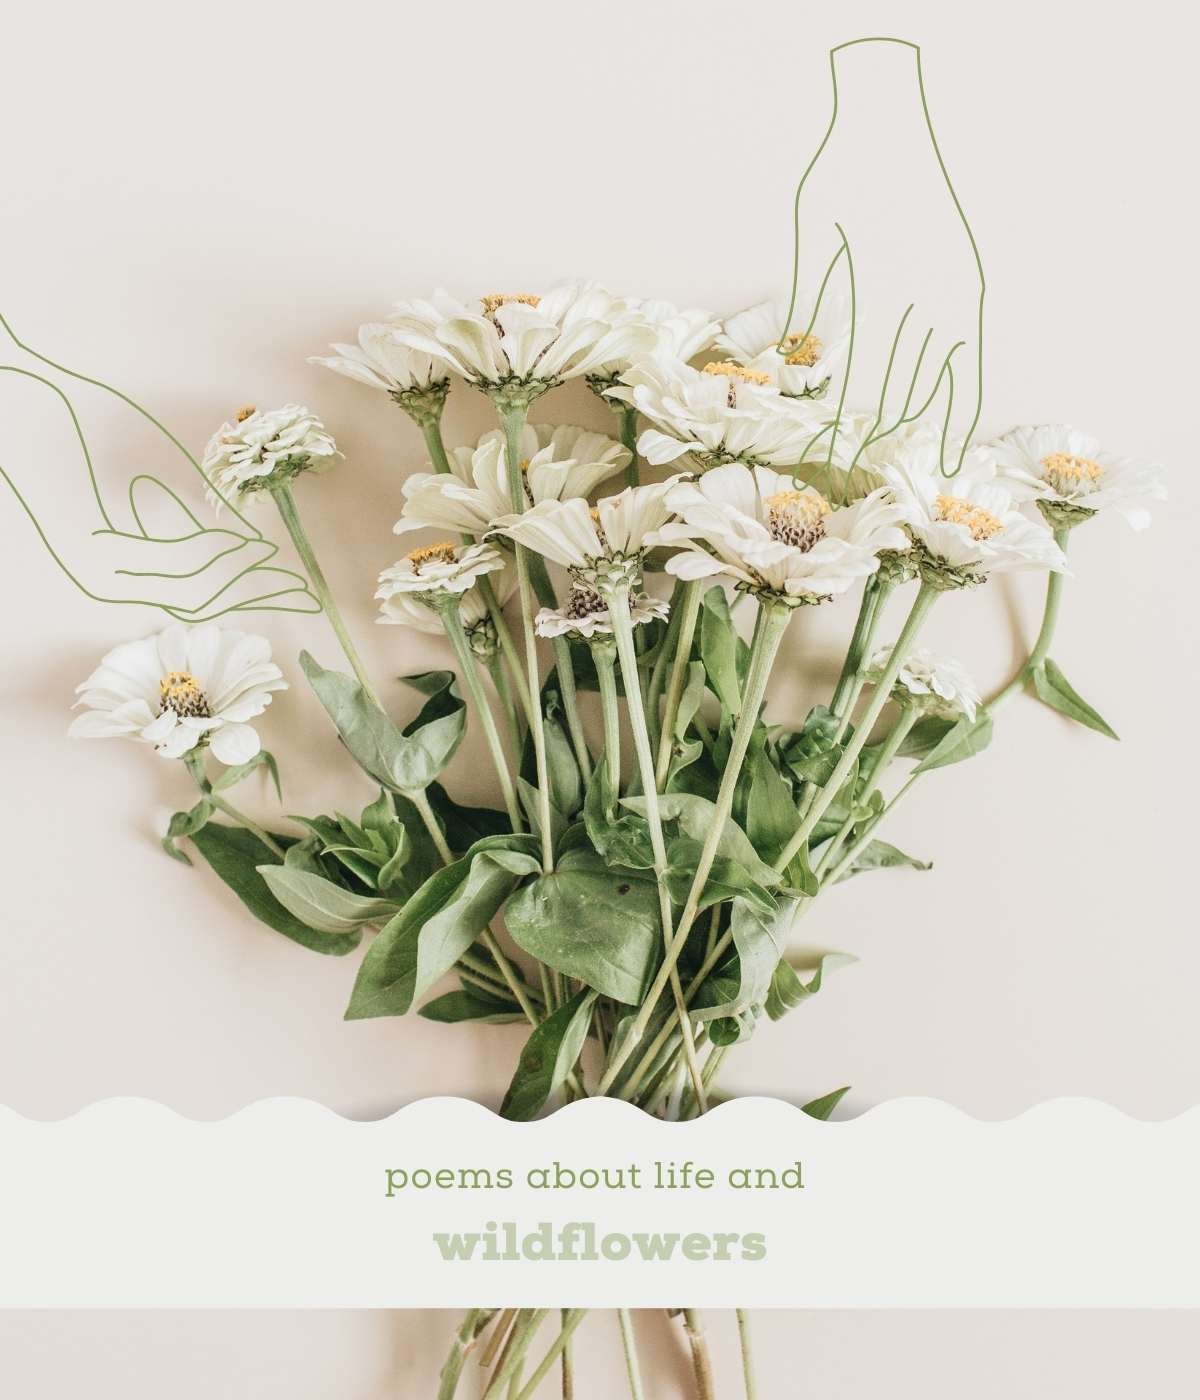 poems about life and wildflowers